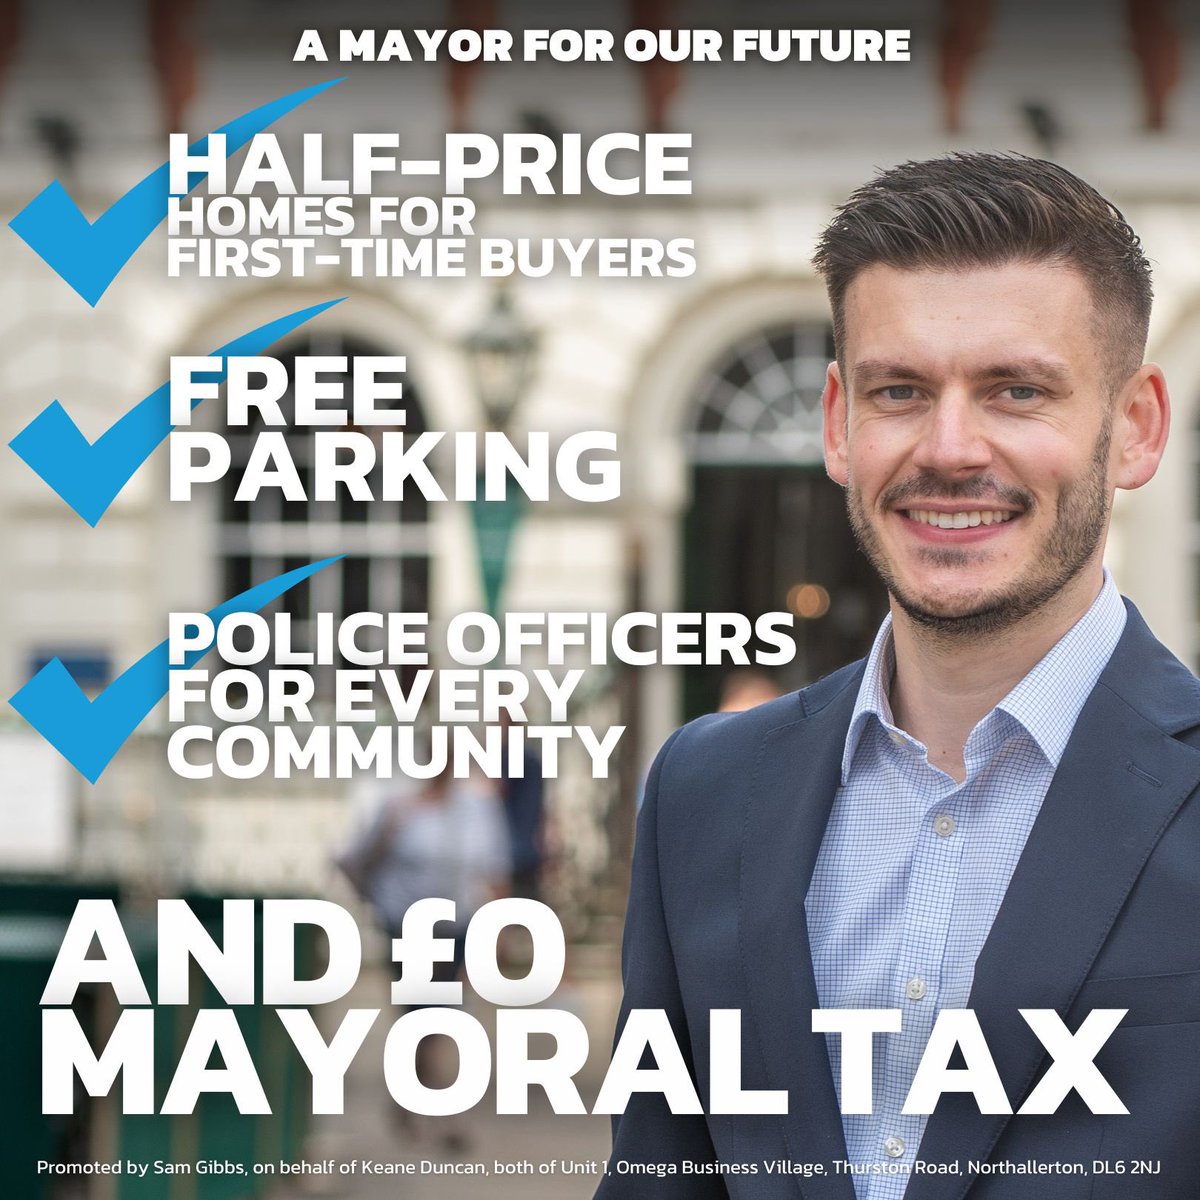 Bold, ambitious action for York & North Yorkshire. Back my plans this Thursday 🗳️